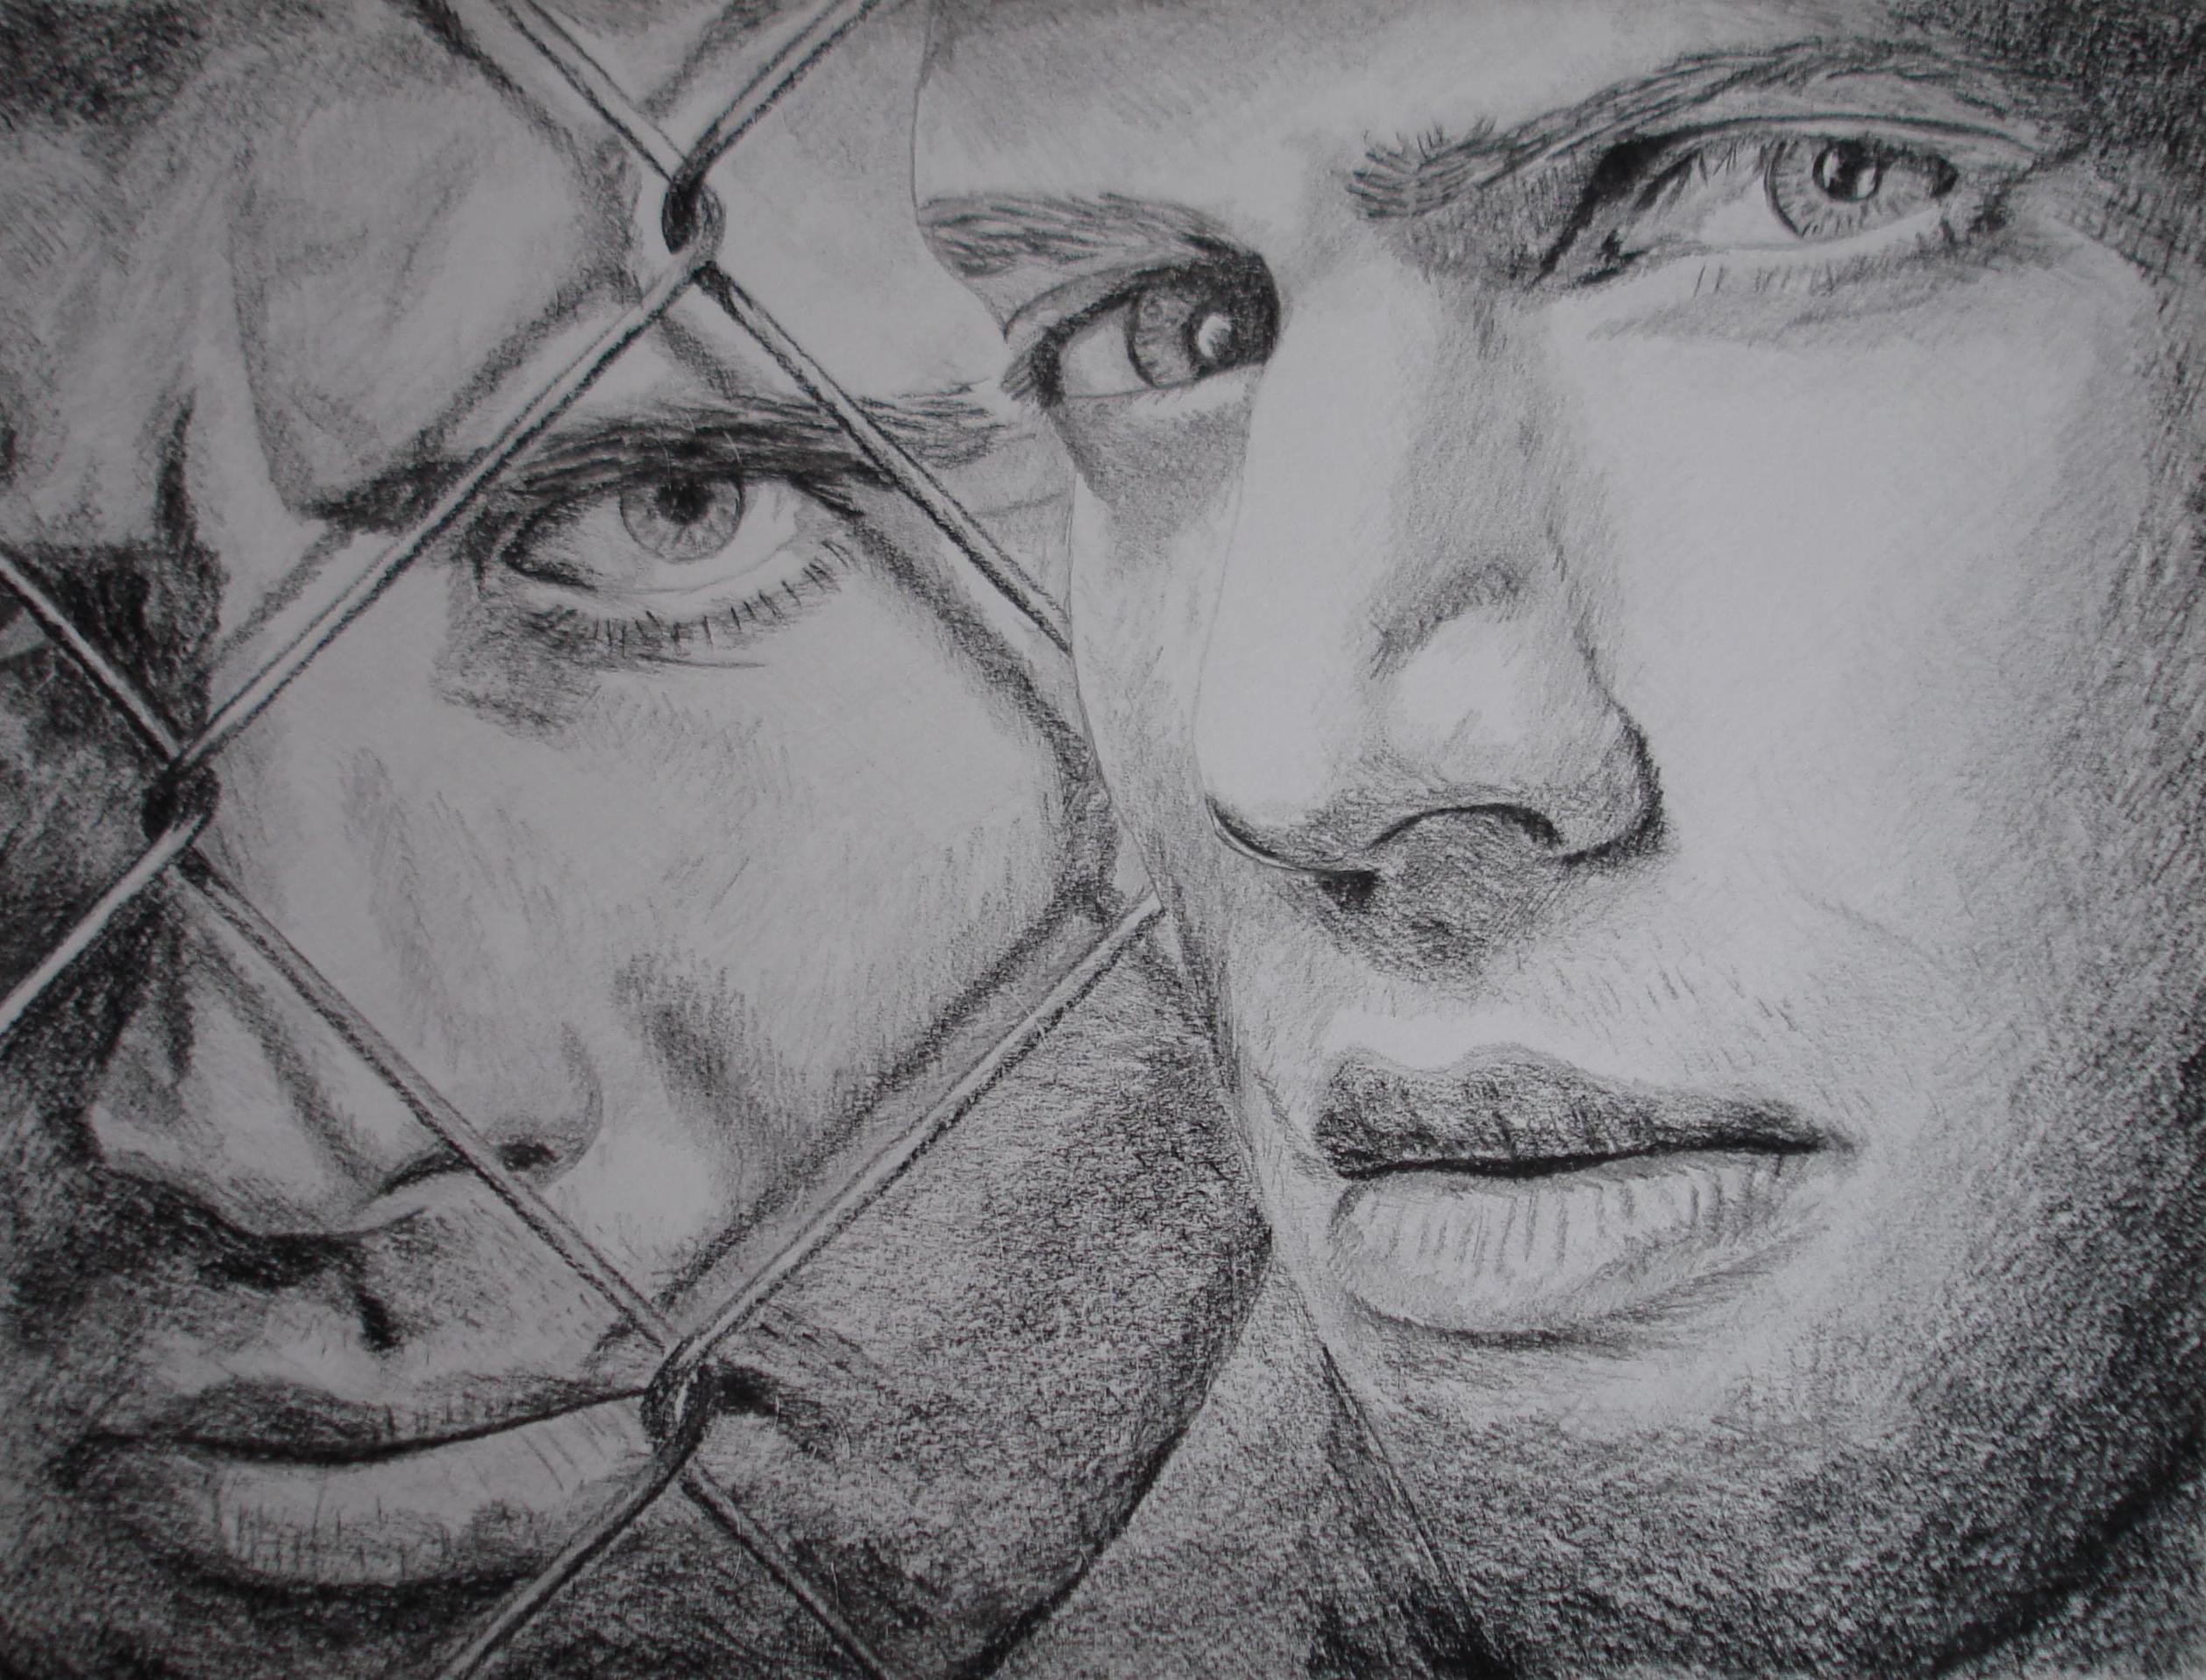 2516x1916 Dominic Purcell and Wentworth Miller by scannerdarkly86 Dominic Purcell and Wentworth  Miller by scannerdarkly86